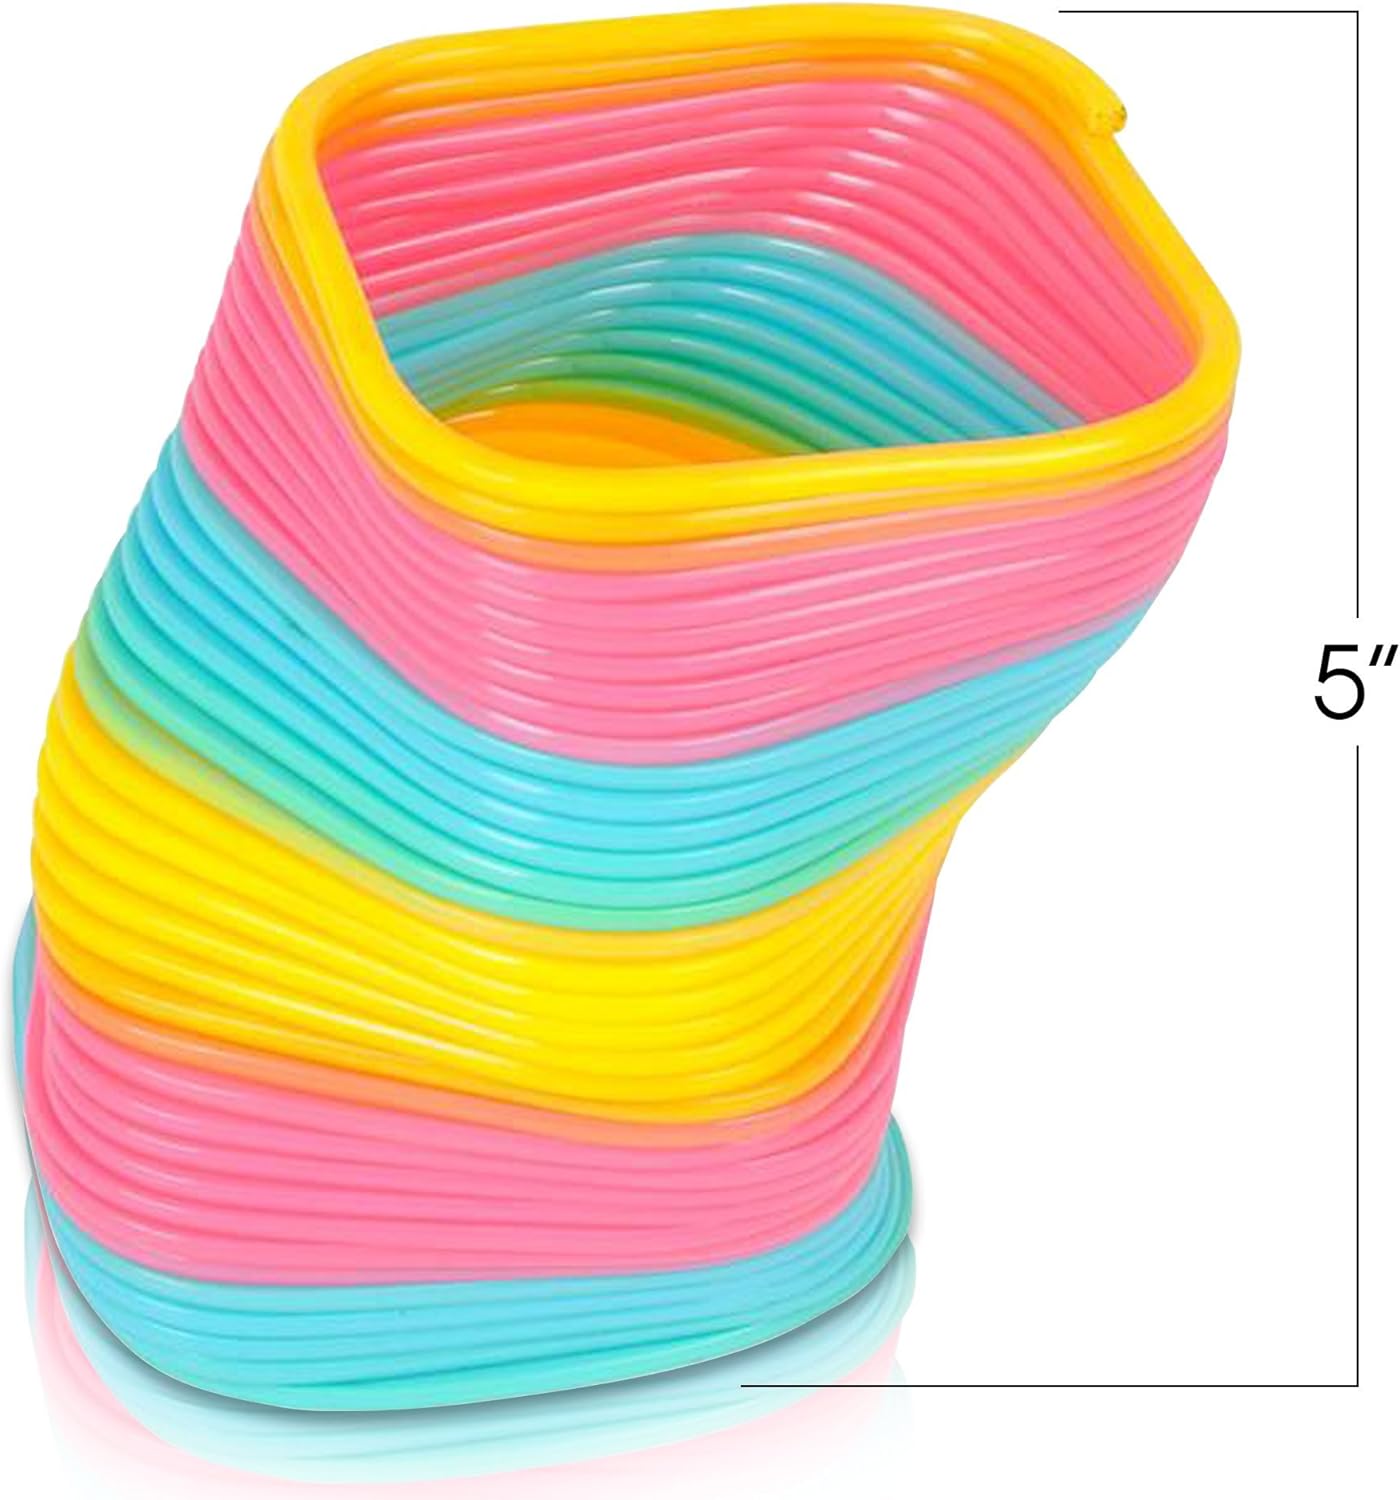 Jumbo Square Coil Spring Toy for Kids, 4.75 Inch Plastic Coil, Giant Coil Spring Toy, Relieves Stress and Anxiety Fidget Toy, Unique Kids & Adults Valentines Stocking Stuffer Gift Idea, Novelty Gift